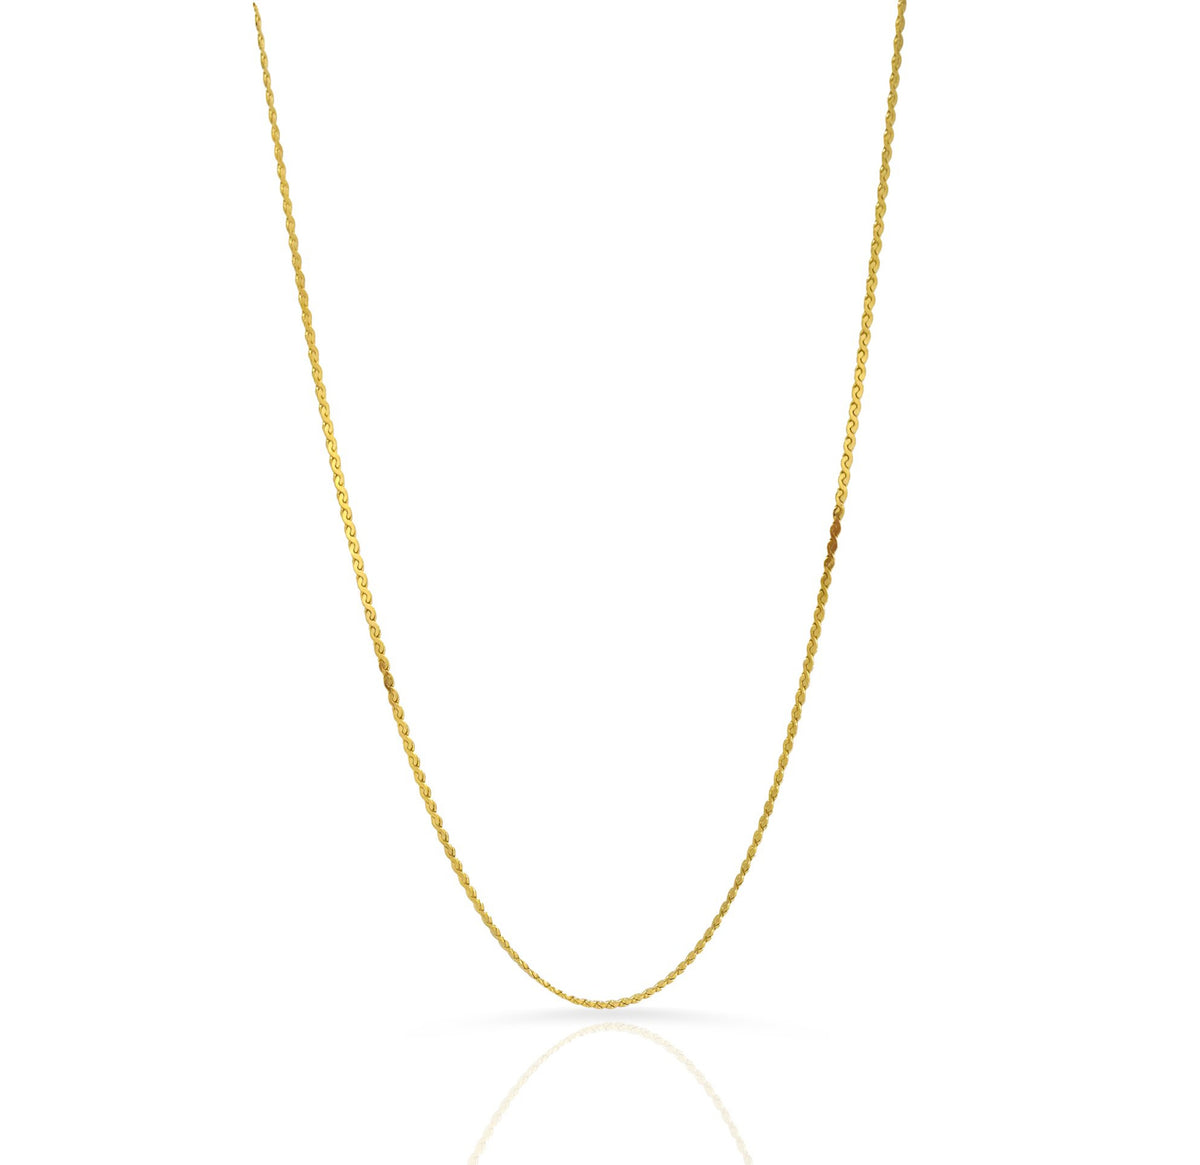 FAYE DAINTY THIN GOLD CHAIN NECKLACE